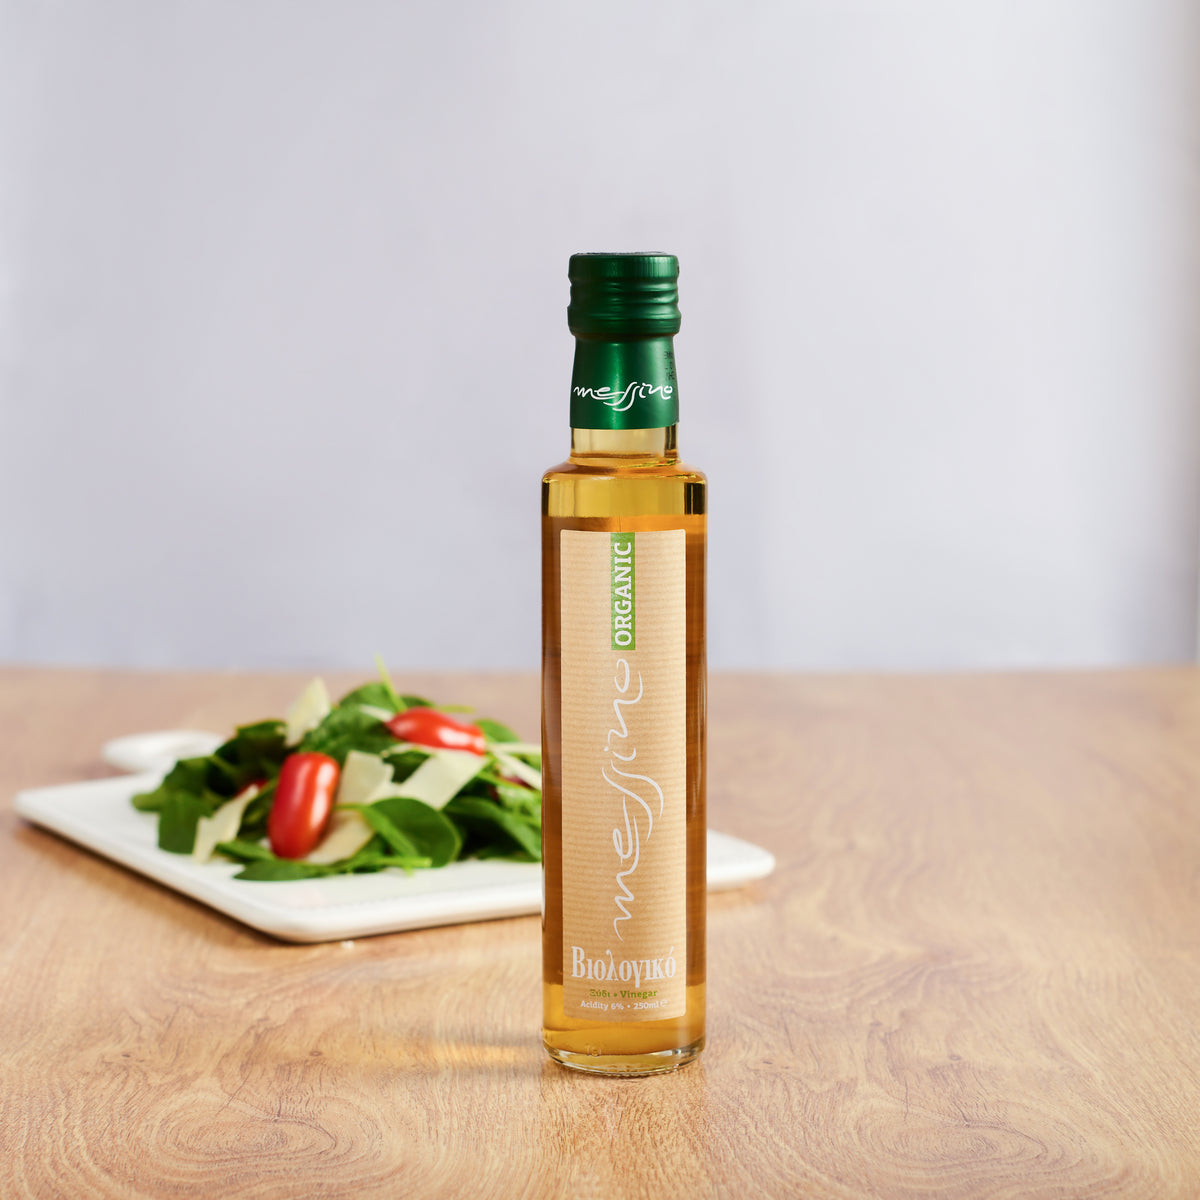 Bottle of Messino Organize White Wine Vinegar and plated salad in the background